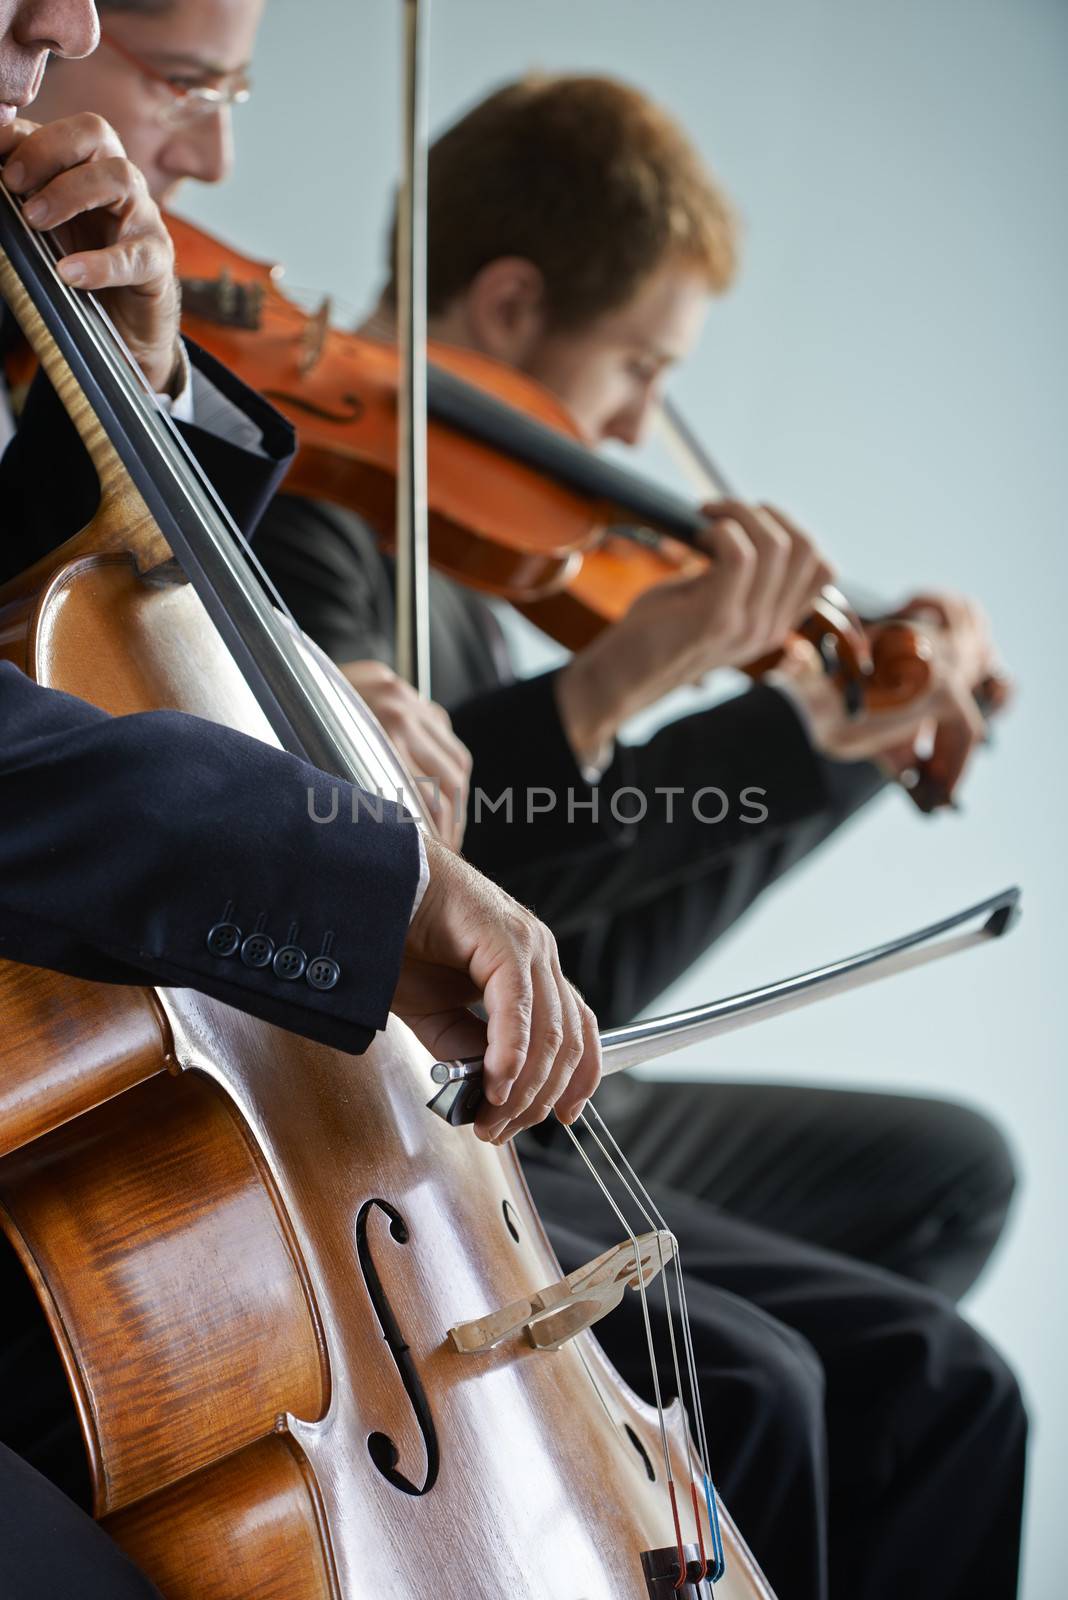 Classical music: concert by stokkete